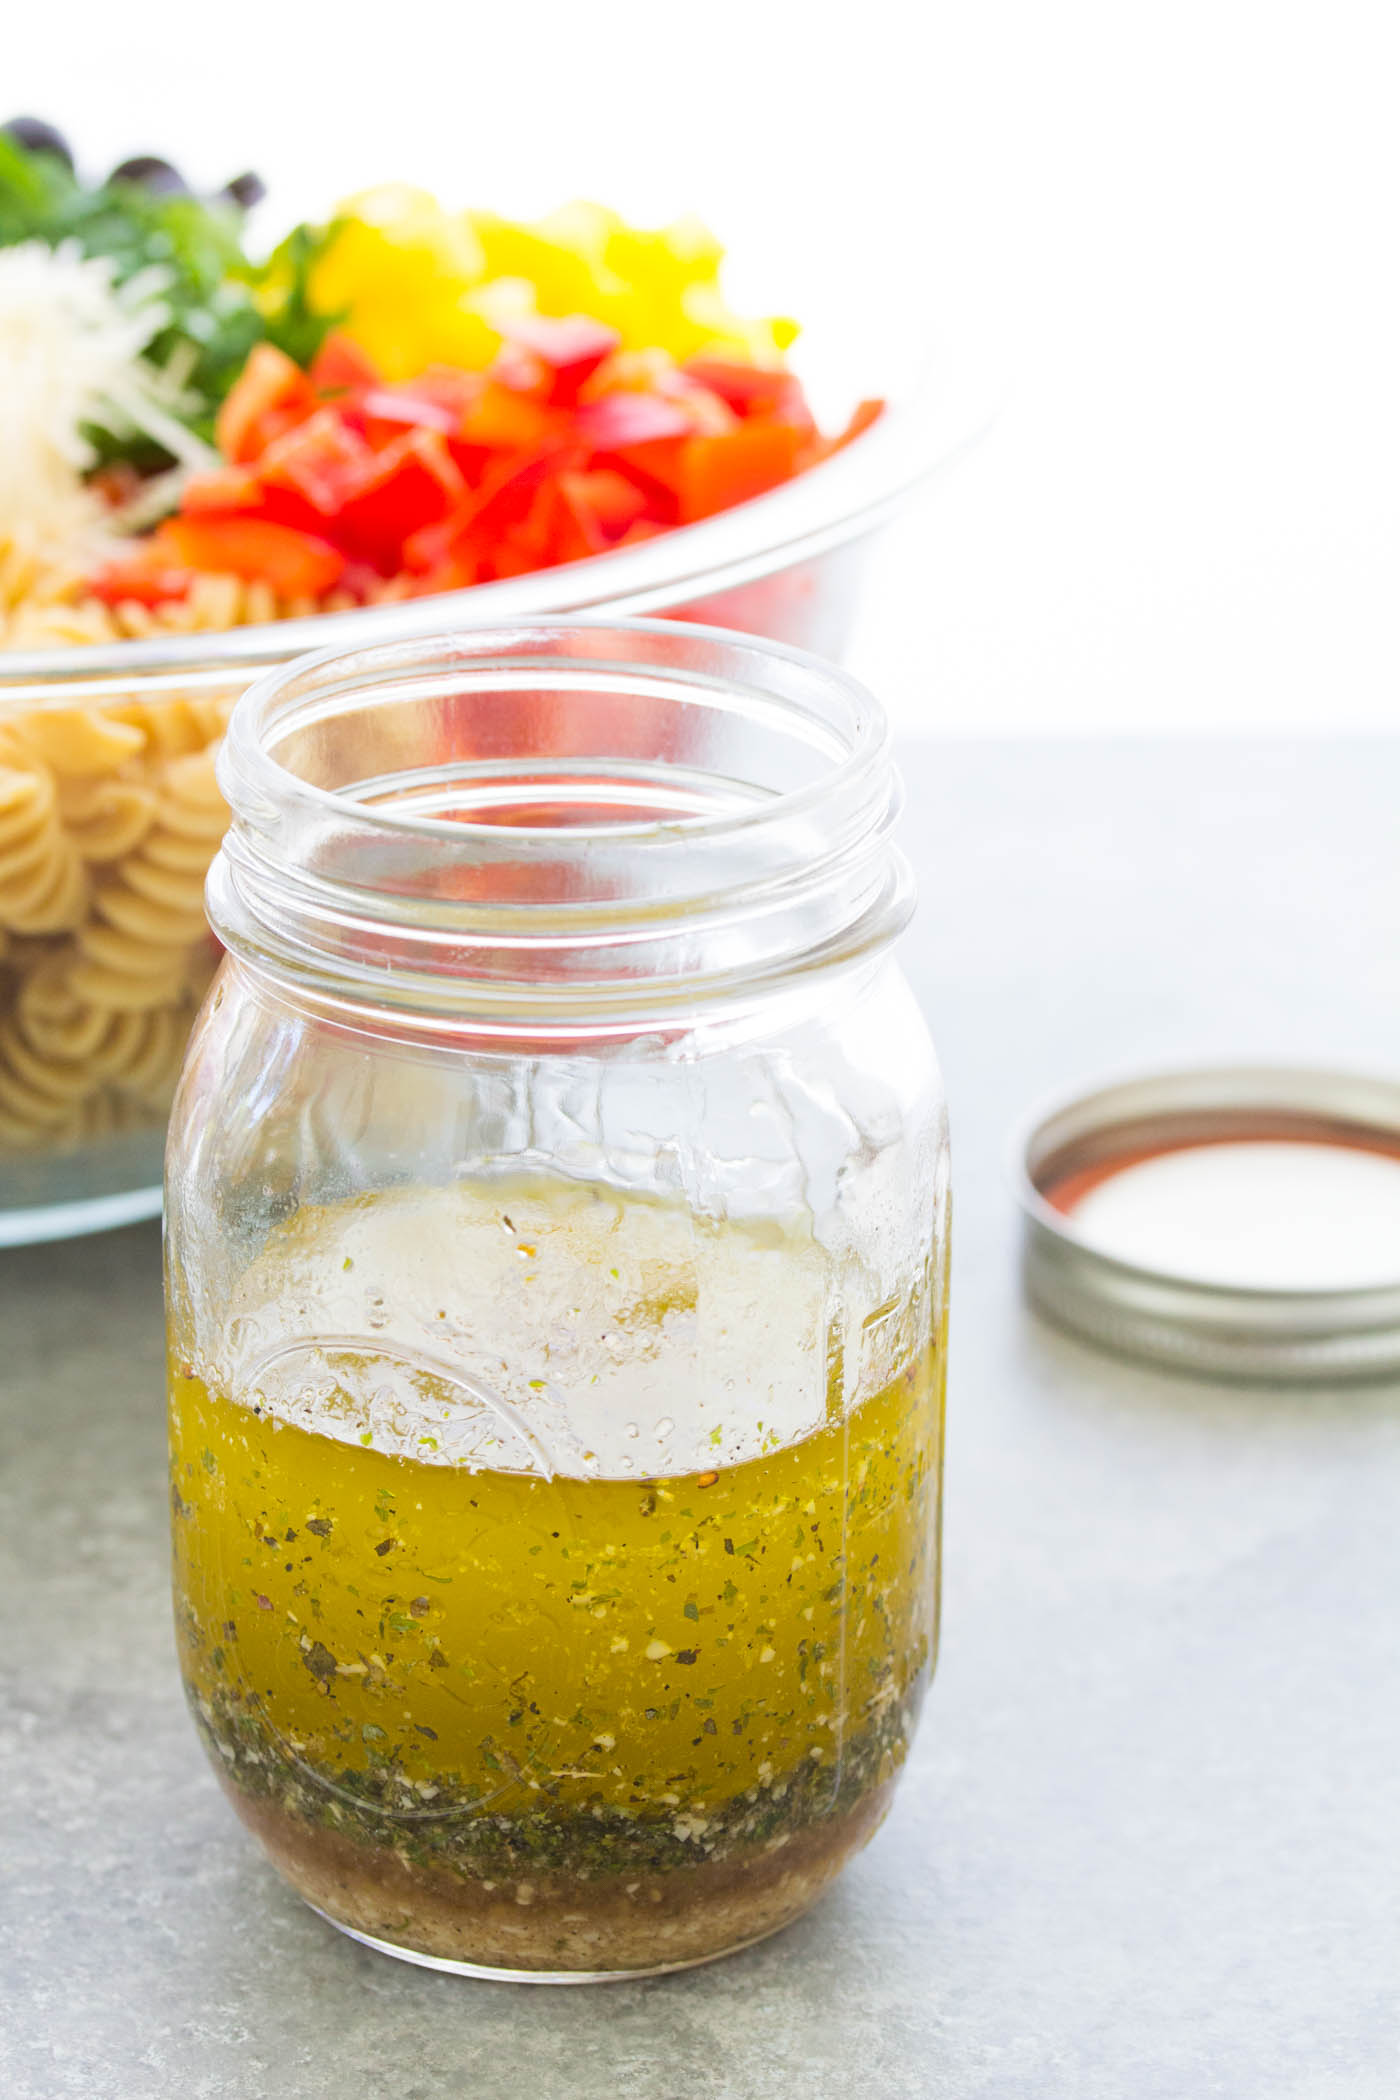 Italian salad dressing in a mason jar with bowl of pasta salad in the background.